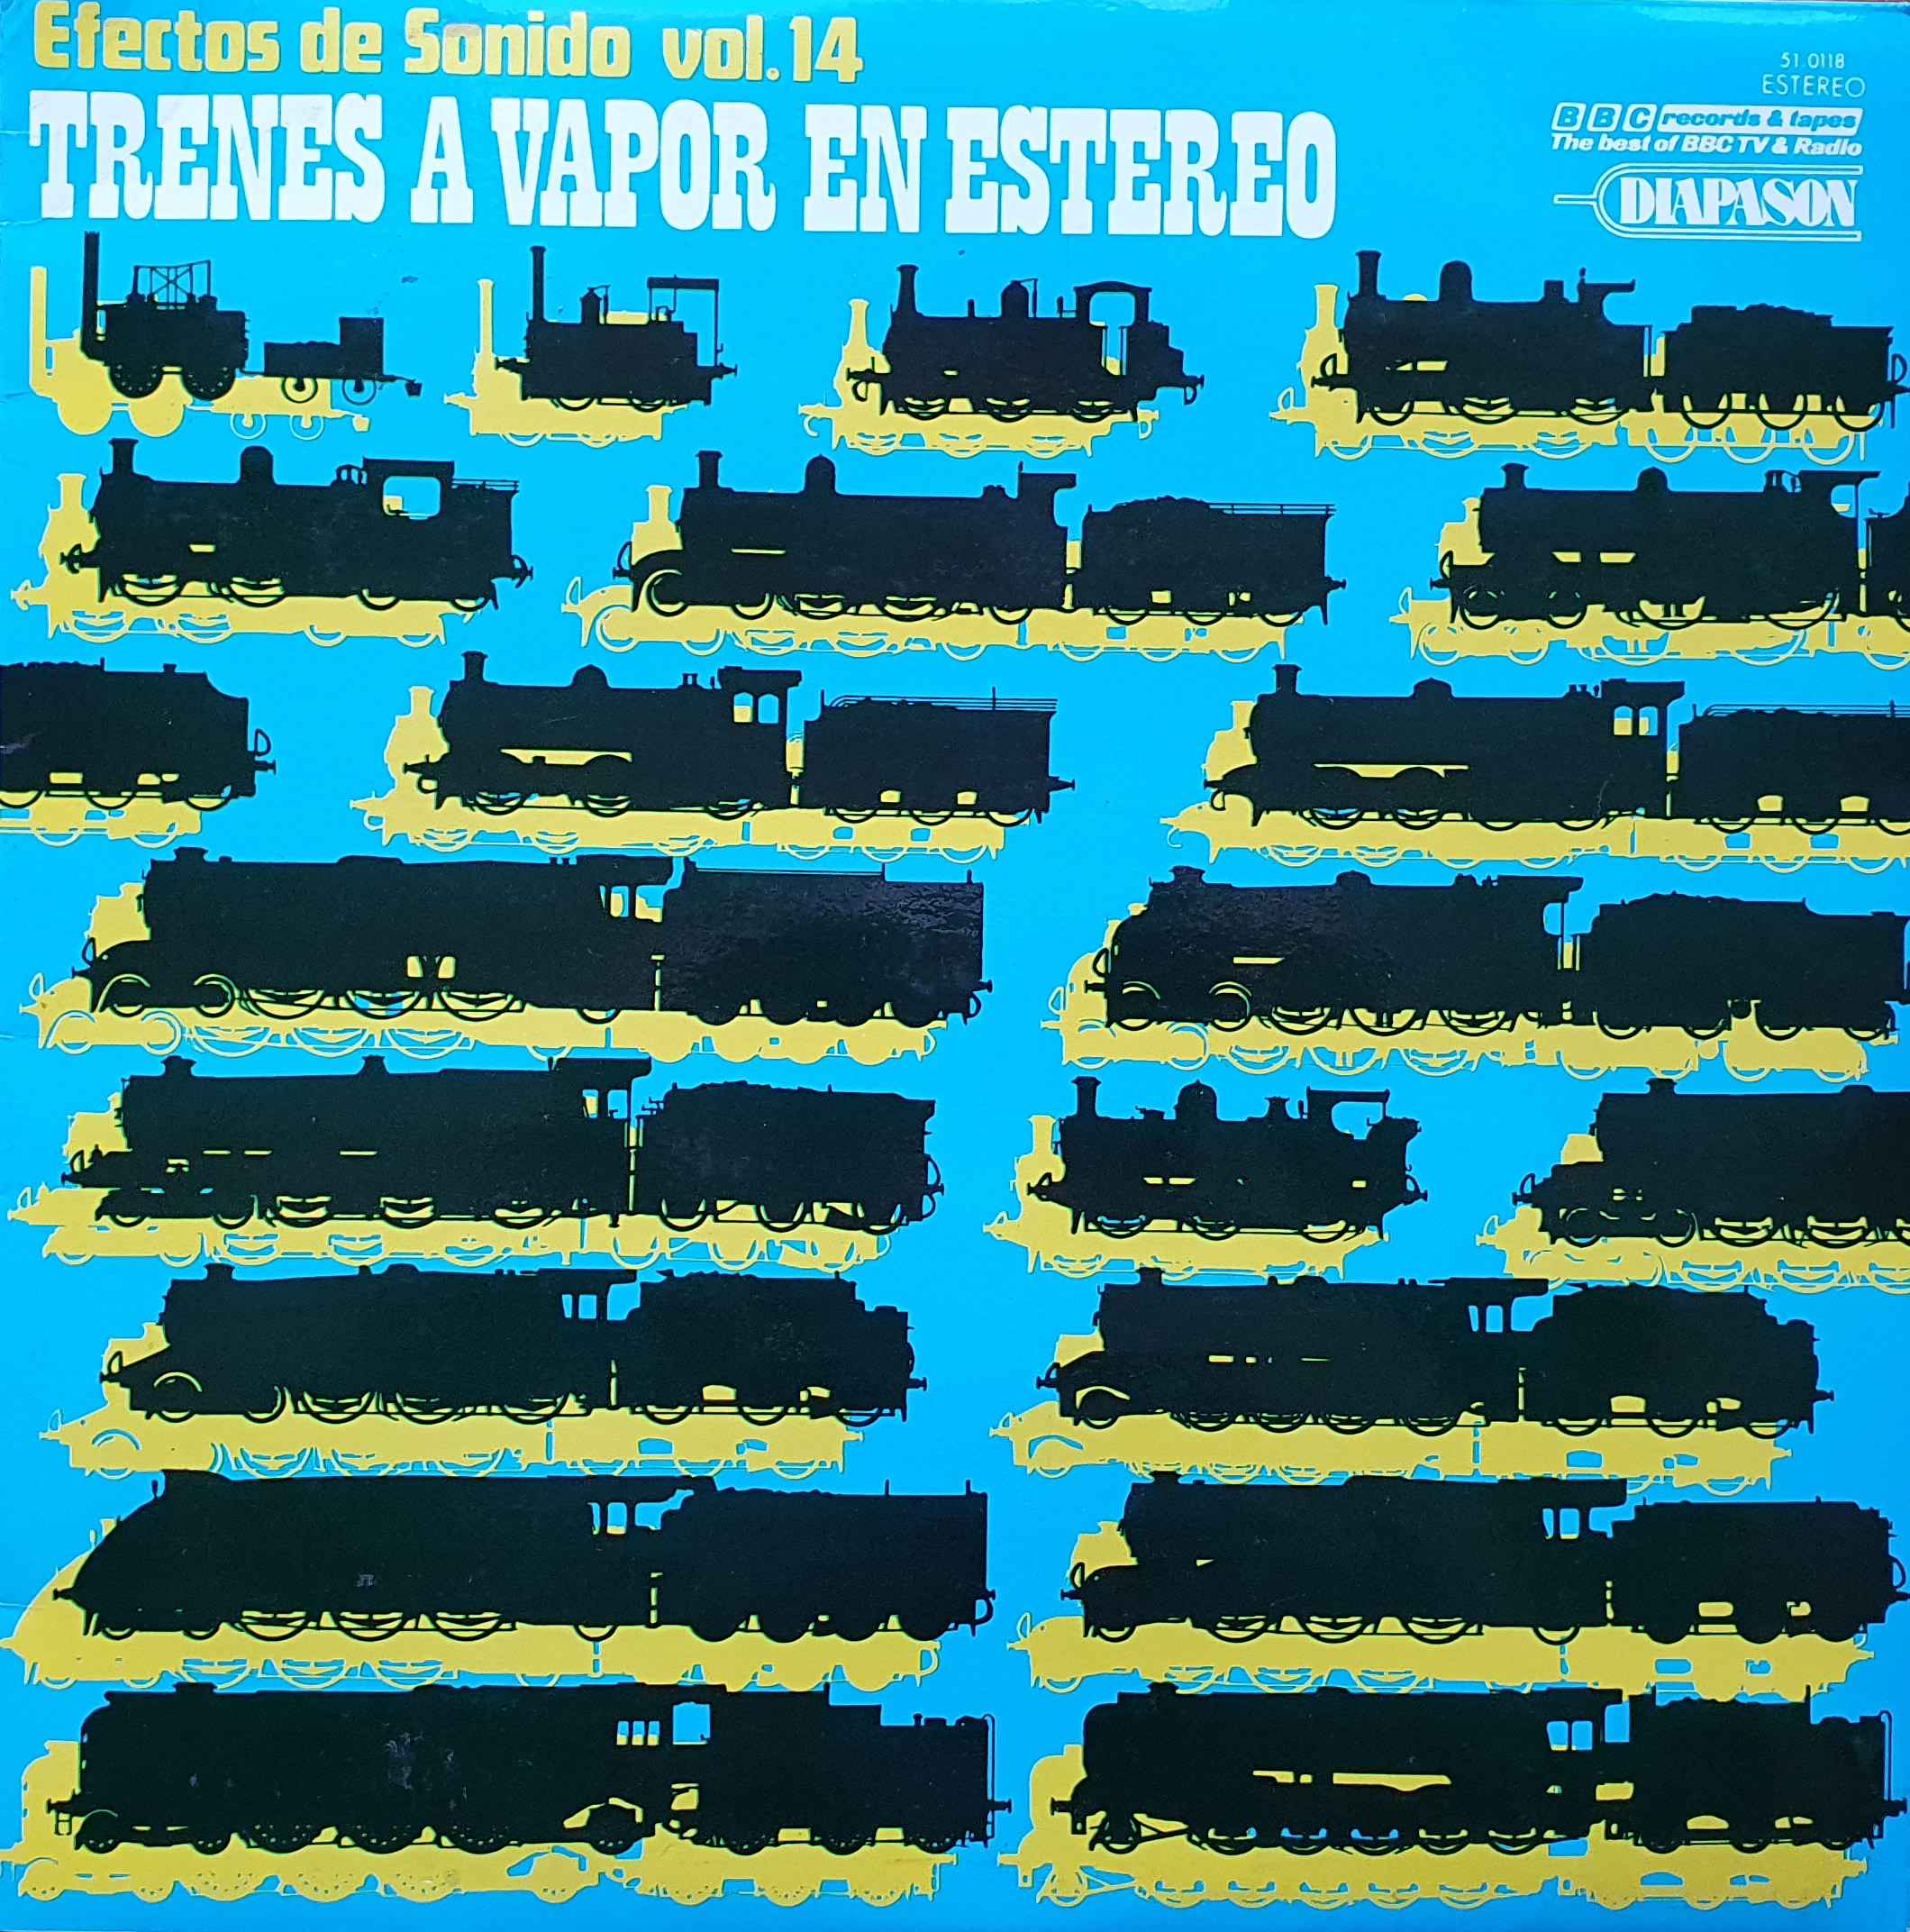 Picture of 51.0118 Trenes a vapor en estereo. Efectos de Sonido Vol. 14 (Spanish import) by artist Various from the BBC albums - Records and Tapes library